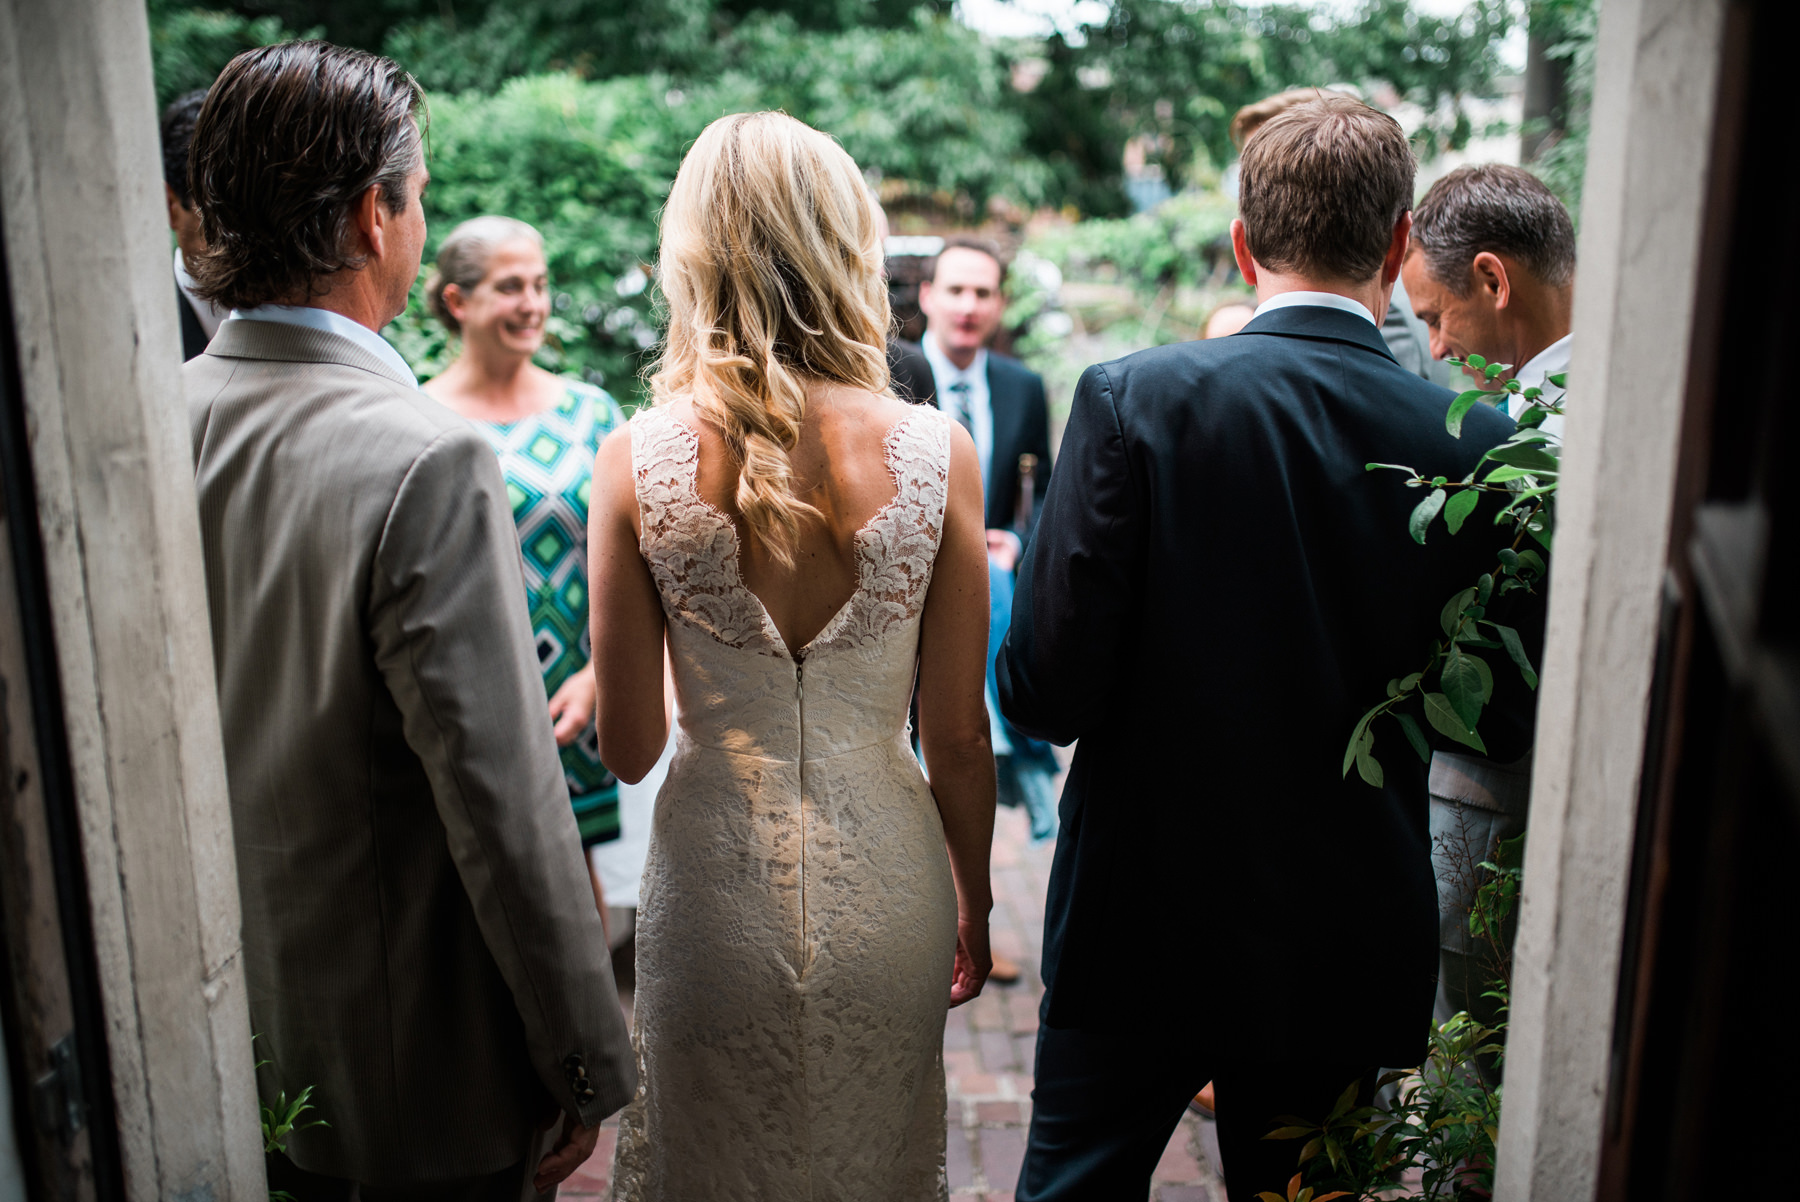 223-outdoor-wedding-at-the-corson-building-in-seattle.jpg